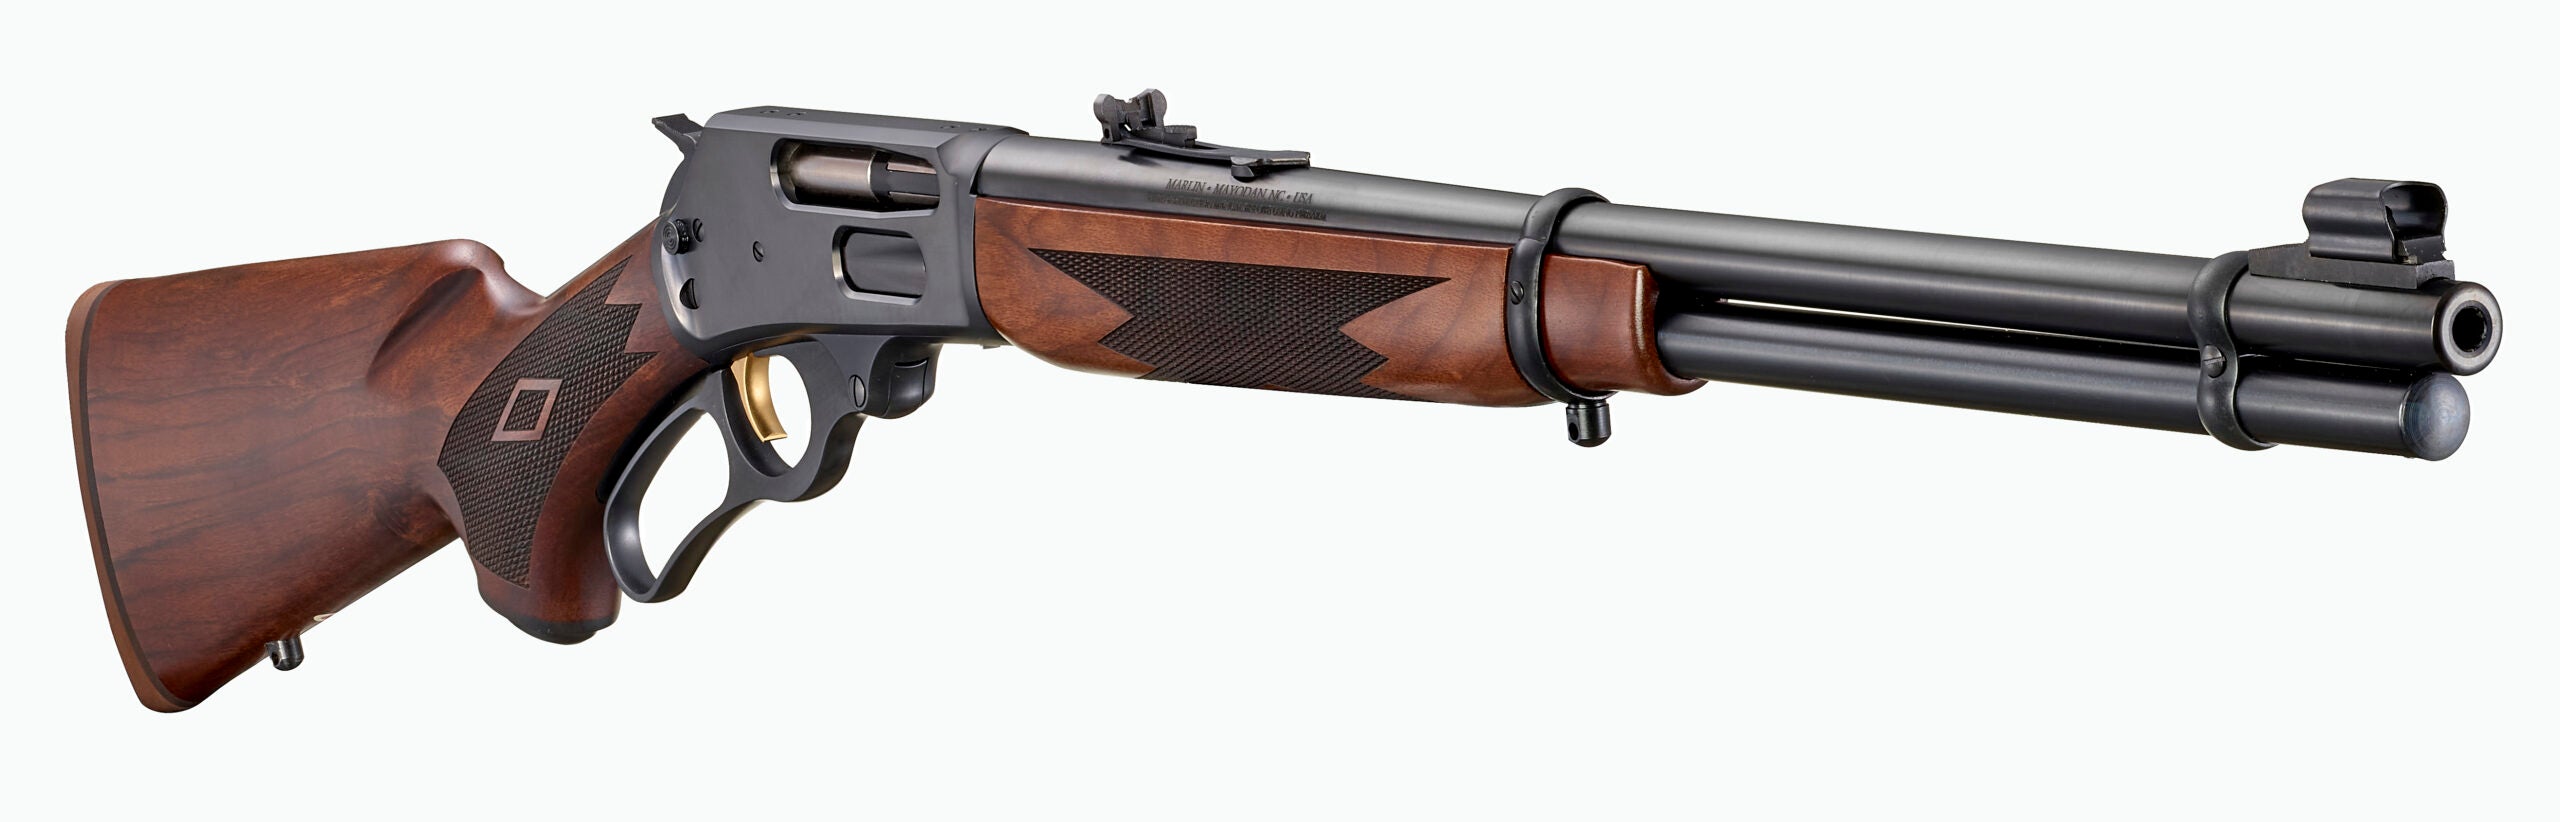 new Marlin 336 by Ruger